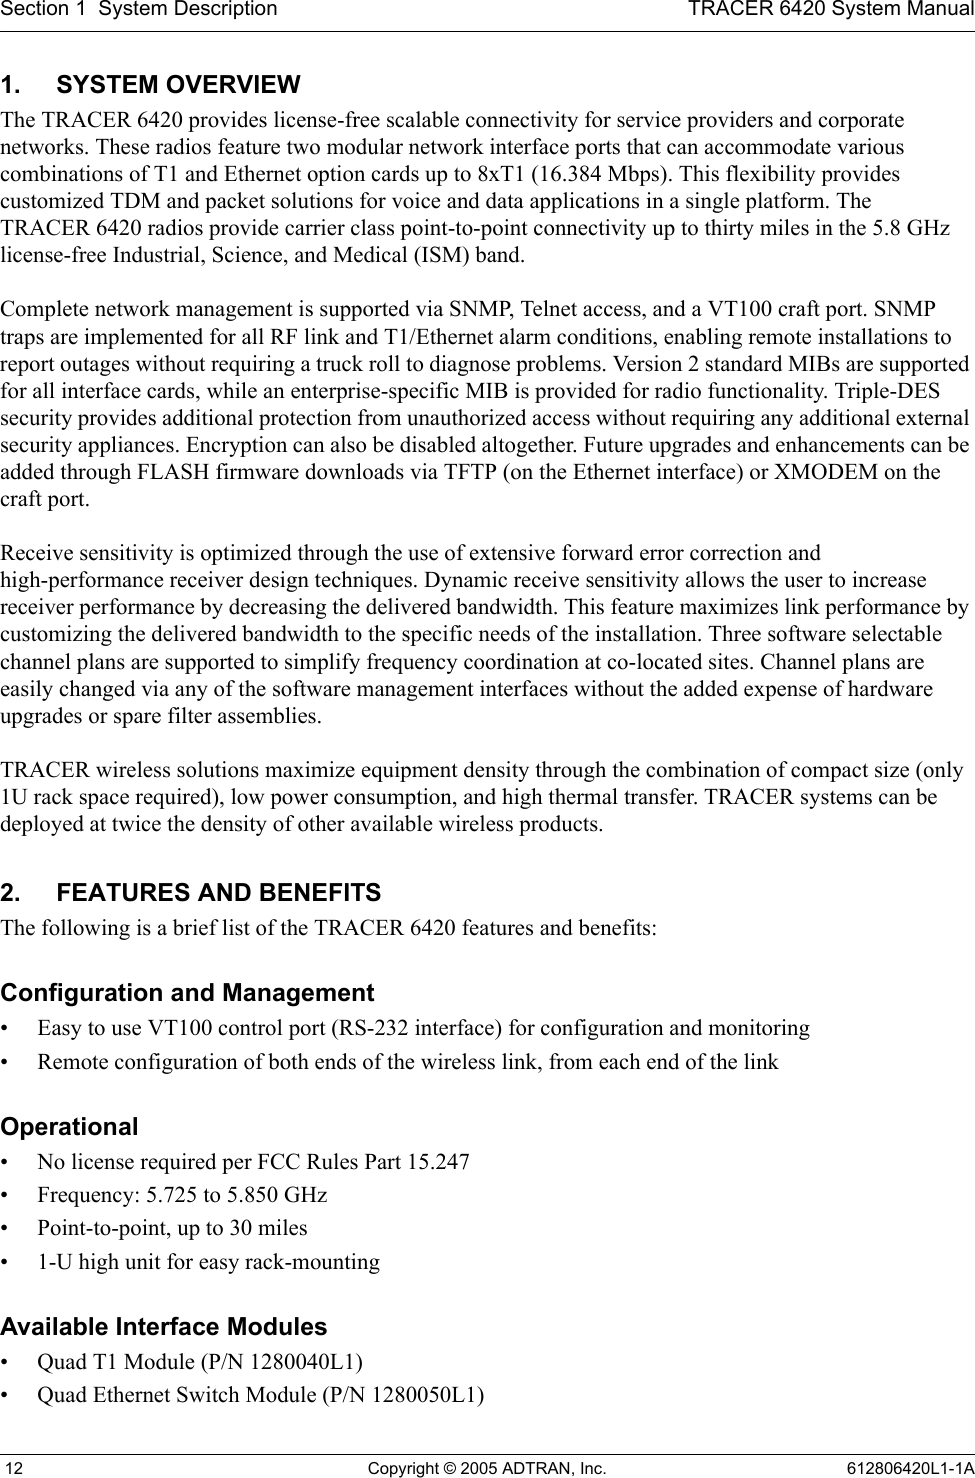 Section 1  System Description TRACER 6420 System Manual 12 Copyright © 2005 ADTRAN, Inc. 612806420L1-1A1. SYSTEM OVERVIEWThe TRACER 6420 provides license-free scalable connectivity for service providers and corporate networks. These radios feature two modular network interface ports that can accommodate various combinations of T1 and Ethernet option cards up to 8xT1 (16.384 Mbps). This flexibility provides customized TDM and packet solutions for voice and data applications in a single platform. The TRACER 6420 radios provide carrier class point-to-point connectivity up to thirty miles in the 5.8 GHz license-free Industrial, Science, and Medical (ISM) band. Complete network management is supported via SNMP, Telnet access, and a VT100 craft port. SNMP traps are implemented for all RF link and T1/Ethernet alarm conditions, enabling remote installations to report outages without requiring a truck roll to diagnose problems. Version 2 standard MIBs are supported for all interface cards, while an enterprise-specific MIB is provided for radio functionality. Triple-DES security provides additional protection from unauthorized access without requiring any additional external security appliances. Encryption can also be disabled altogether. Future upgrades and enhancements can be added through FLASH firmware downloads via TFTP (on the Ethernet interface) or XMODEM on the craft port.Receive sensitivity is optimized through the use of extensive forward error correction and high-performance receiver design techniques. Dynamic receive sensitivity allows the user to increase receiver performance by decreasing the delivered bandwidth. This feature maximizes link performance by customizing the delivered bandwidth to the specific needs of the installation. Three software selectable channel plans are supported to simplify frequency coordination at co-located sites. Channel plans are easily changed via any of the software management interfaces without the added expense of hardware upgrades or spare filter assemblies.TRACER wireless solutions maximize equipment density through the combination of compact size (only 1U rack space required), low power consumption, and high thermal transfer. TRACER systems can be deployed at twice the density of other available wireless products.2. FEATURES AND BENEFITSThe following is a brief list of the TRACER 6420 features and benefits:Configuration and Management• Easy to use VT100 control port (RS-232 interface) for configuration and monitoring• Remote configuration of both ends of the wireless link, from each end of the linkOperational• No license required per FCC Rules Part 15.247• Frequency: 5.725 to 5.850 GHz• Point-to-point, up to 30 miles• 1-U high unit for easy rack-mountingAvailable Interface Modules• Quad T1 Module (P/N 1280040L1)• Quad Ethernet Switch Module (P/N 1280050L1)